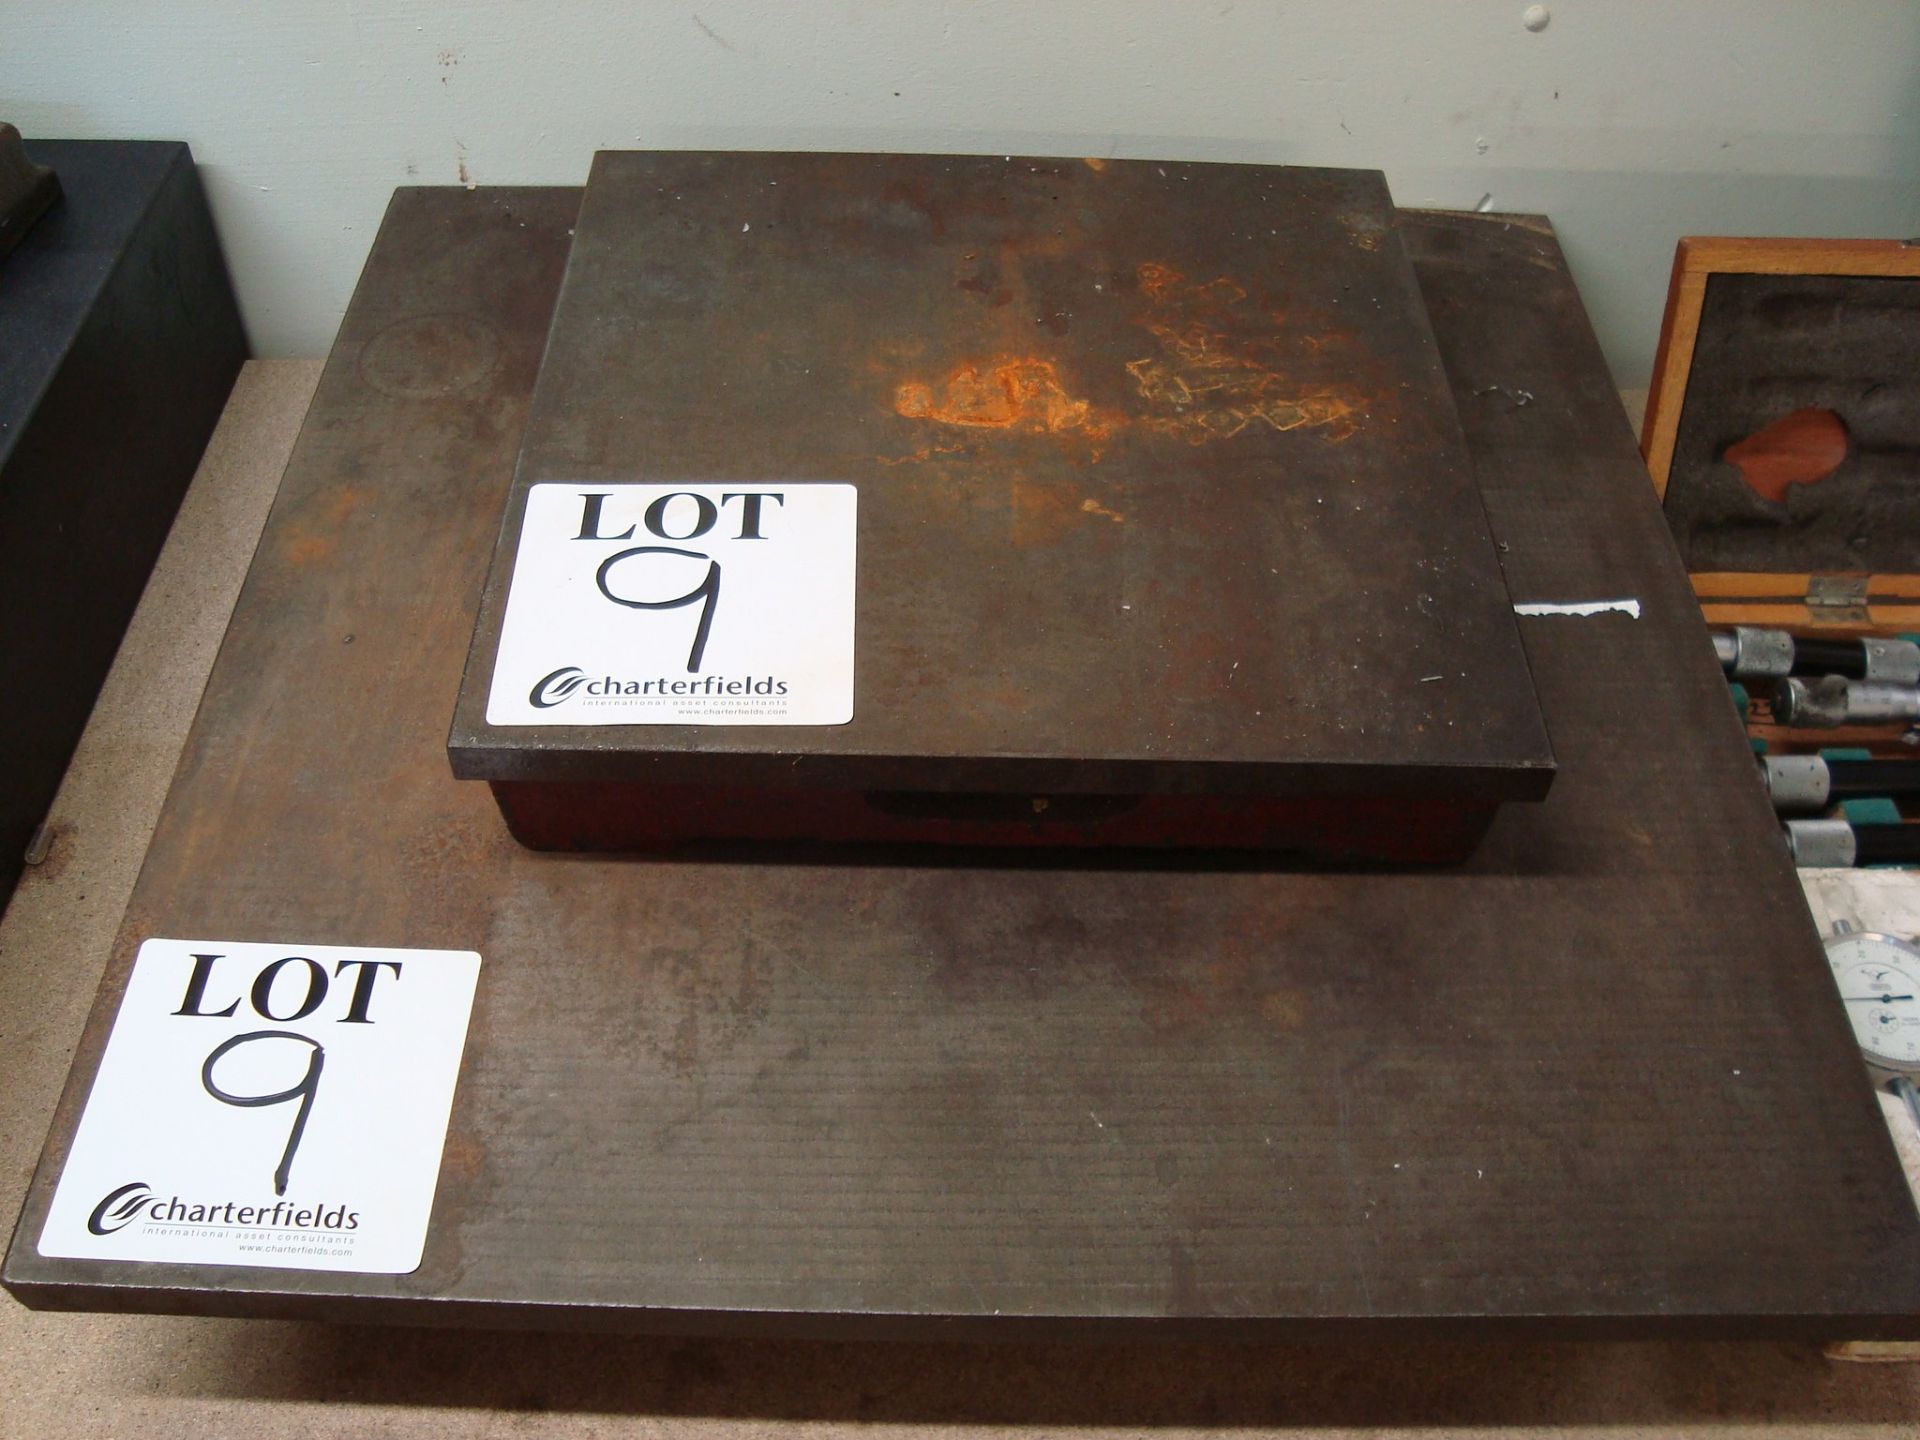 Two steel surface plates approx 500x500mm and 300x300mm respectively